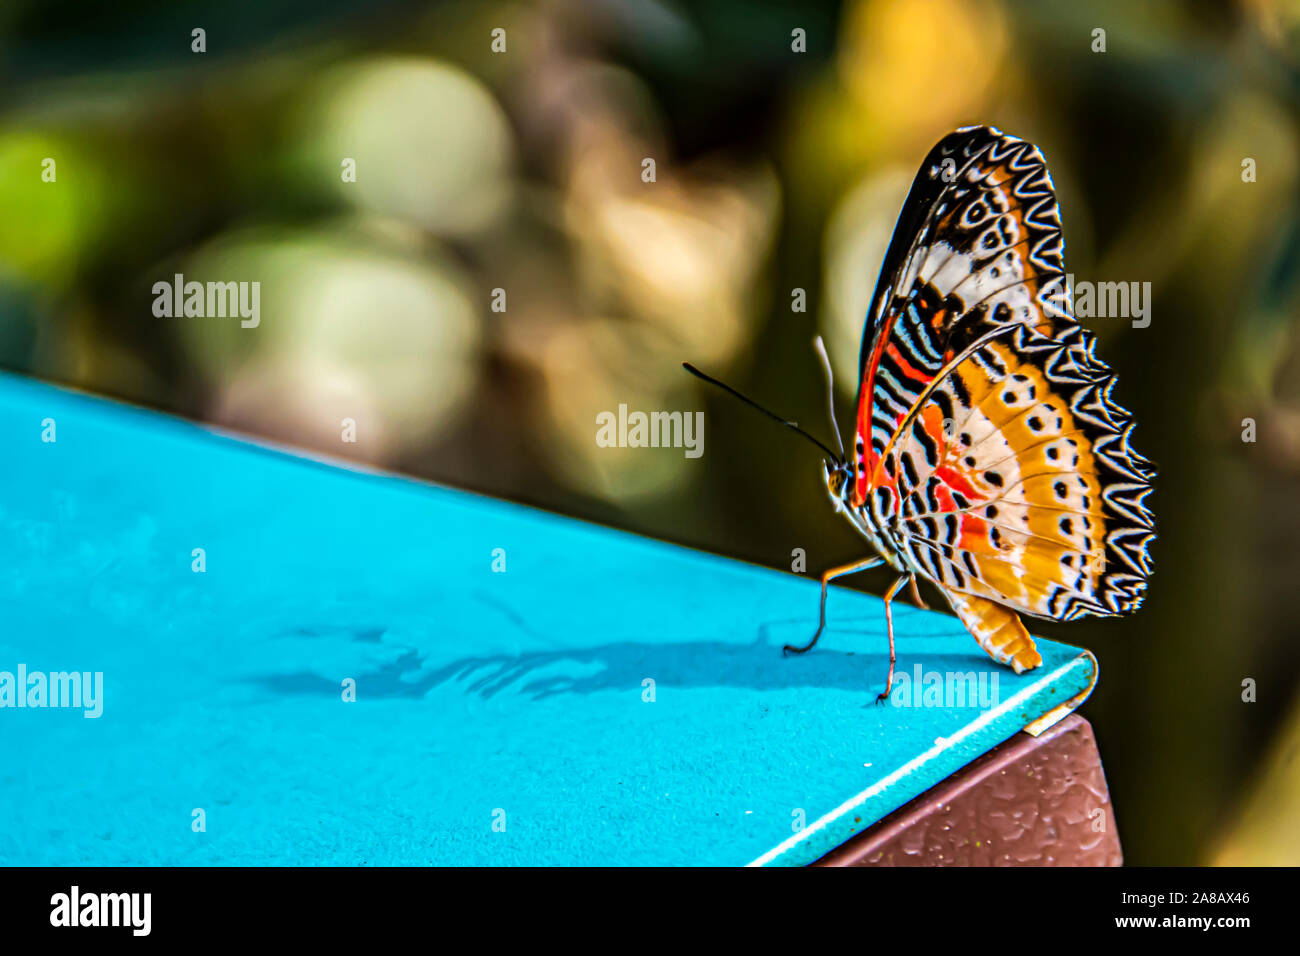 Close-up of butterfly with multicolored wings posing on a table Stock Photo